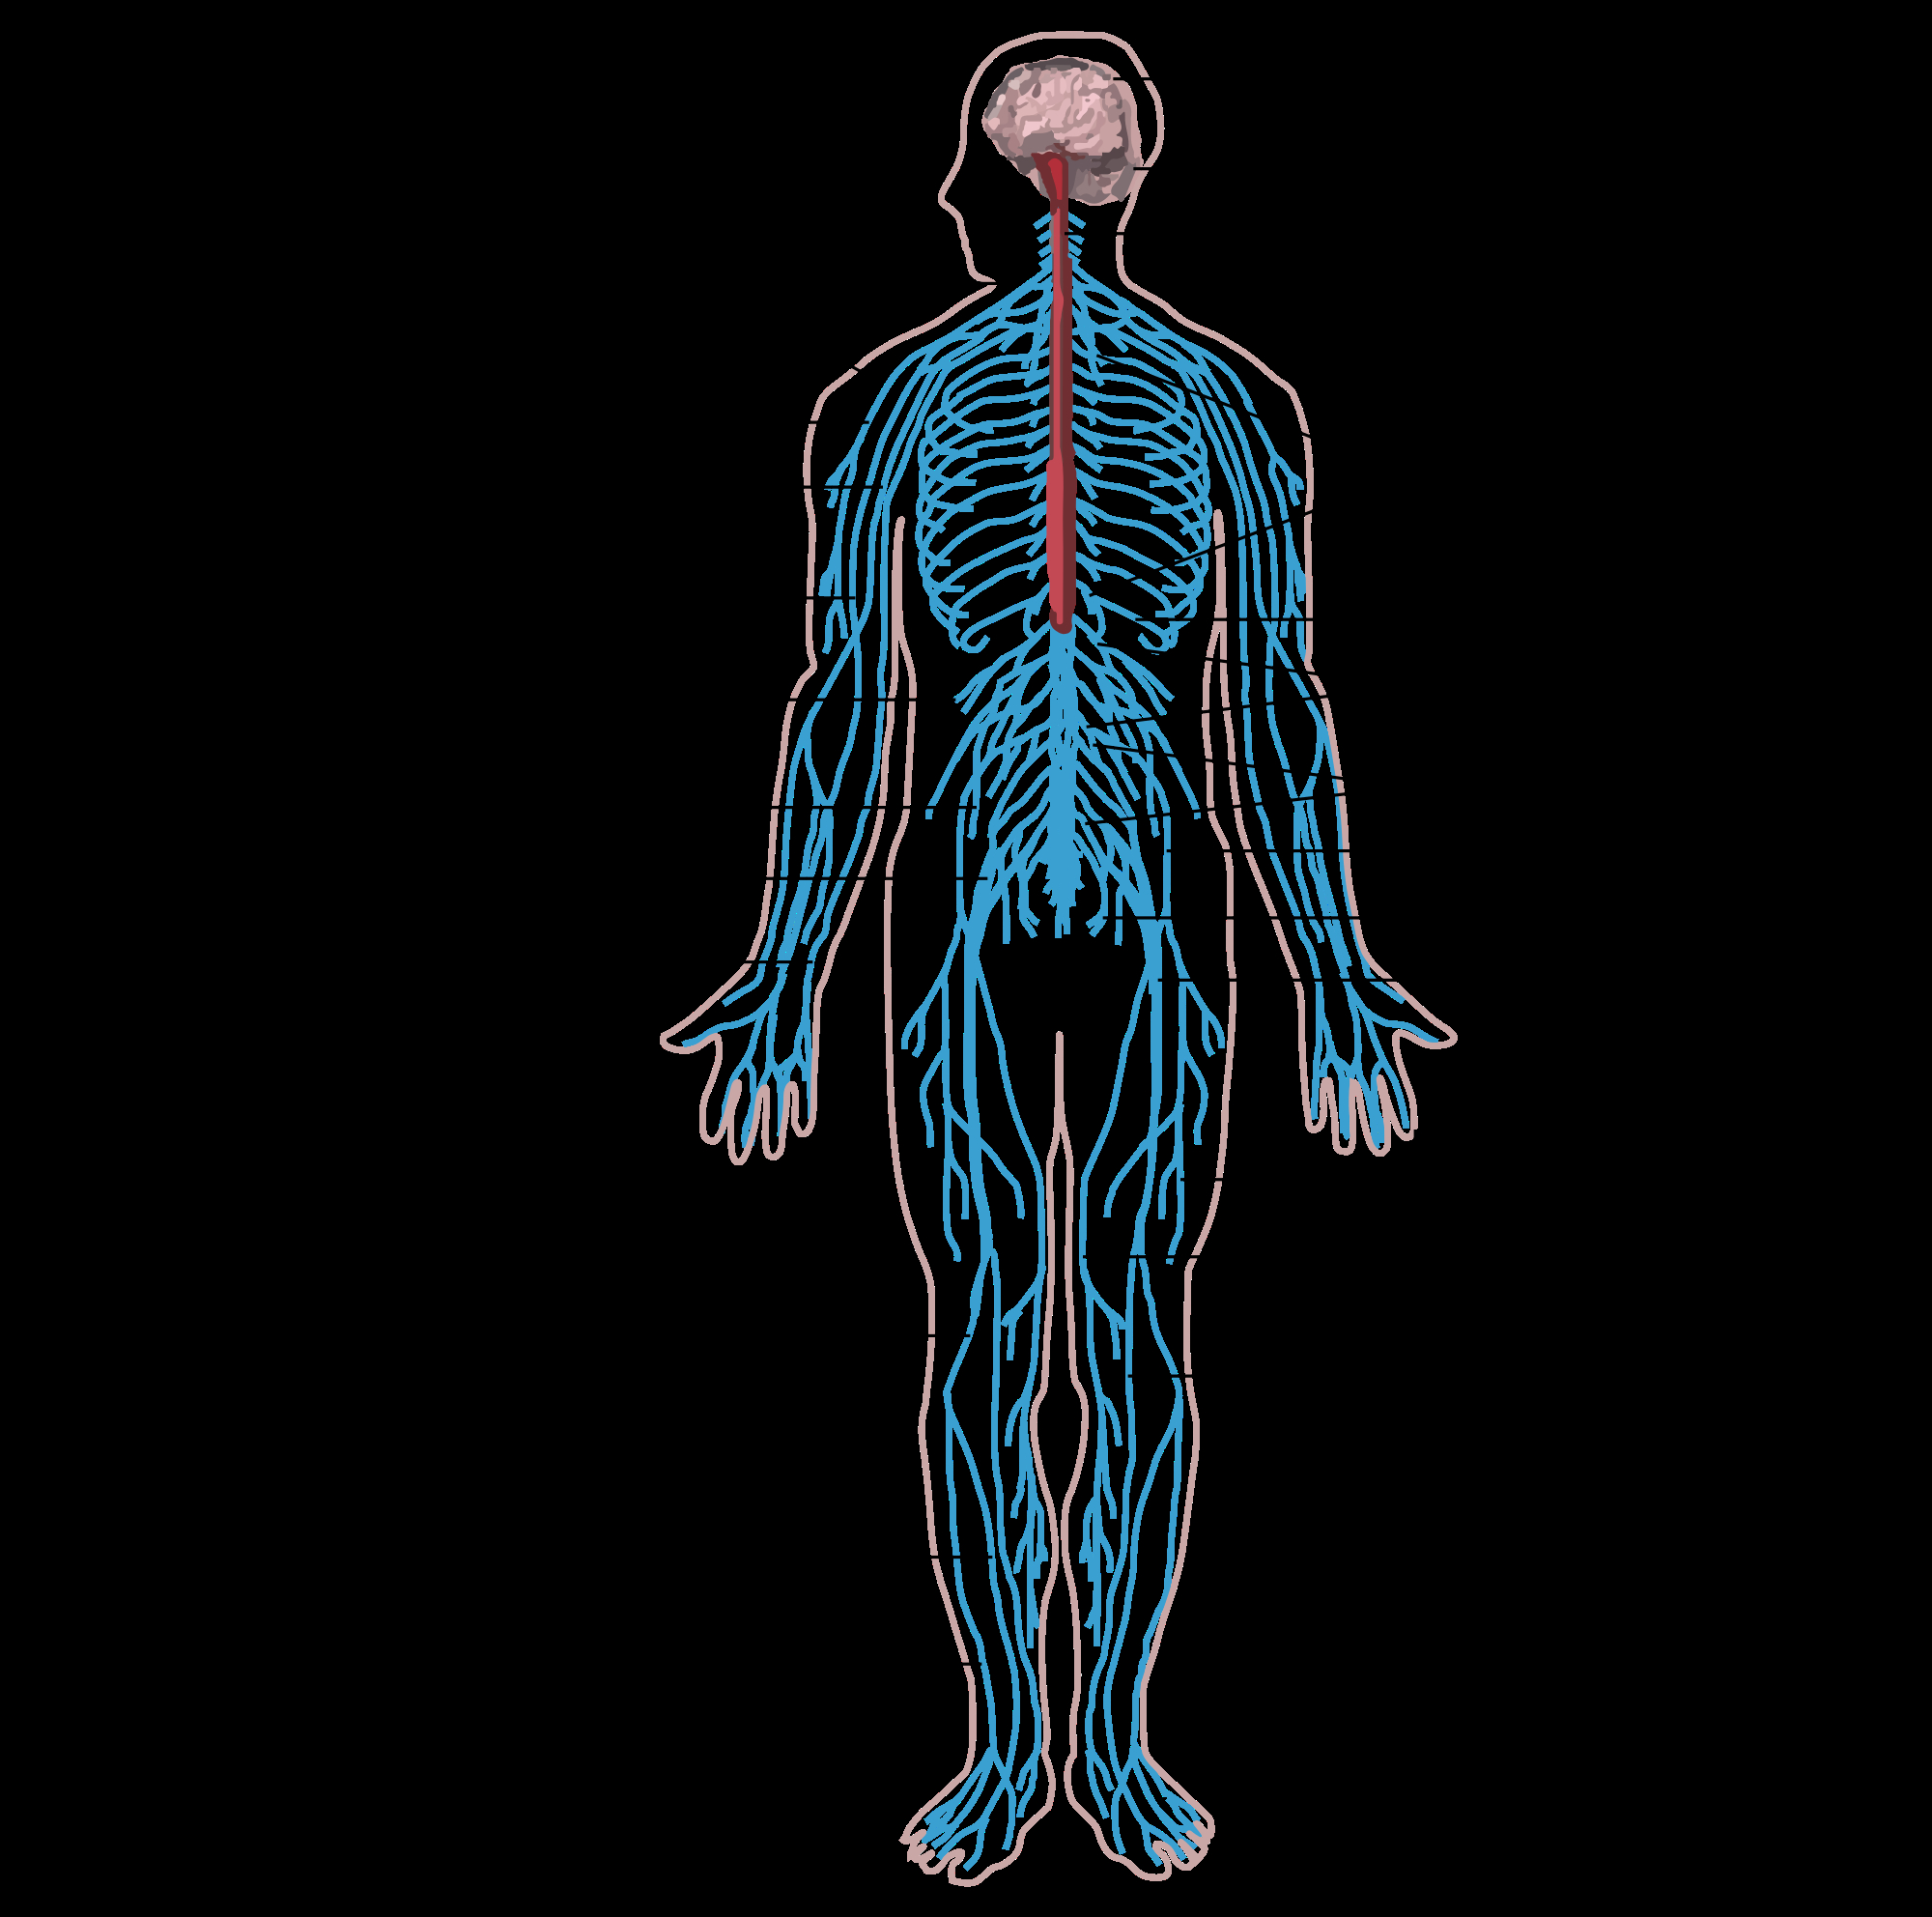 Nervous System Diagram What Structures Are Part Of The Peripheral Nervous System Socratic